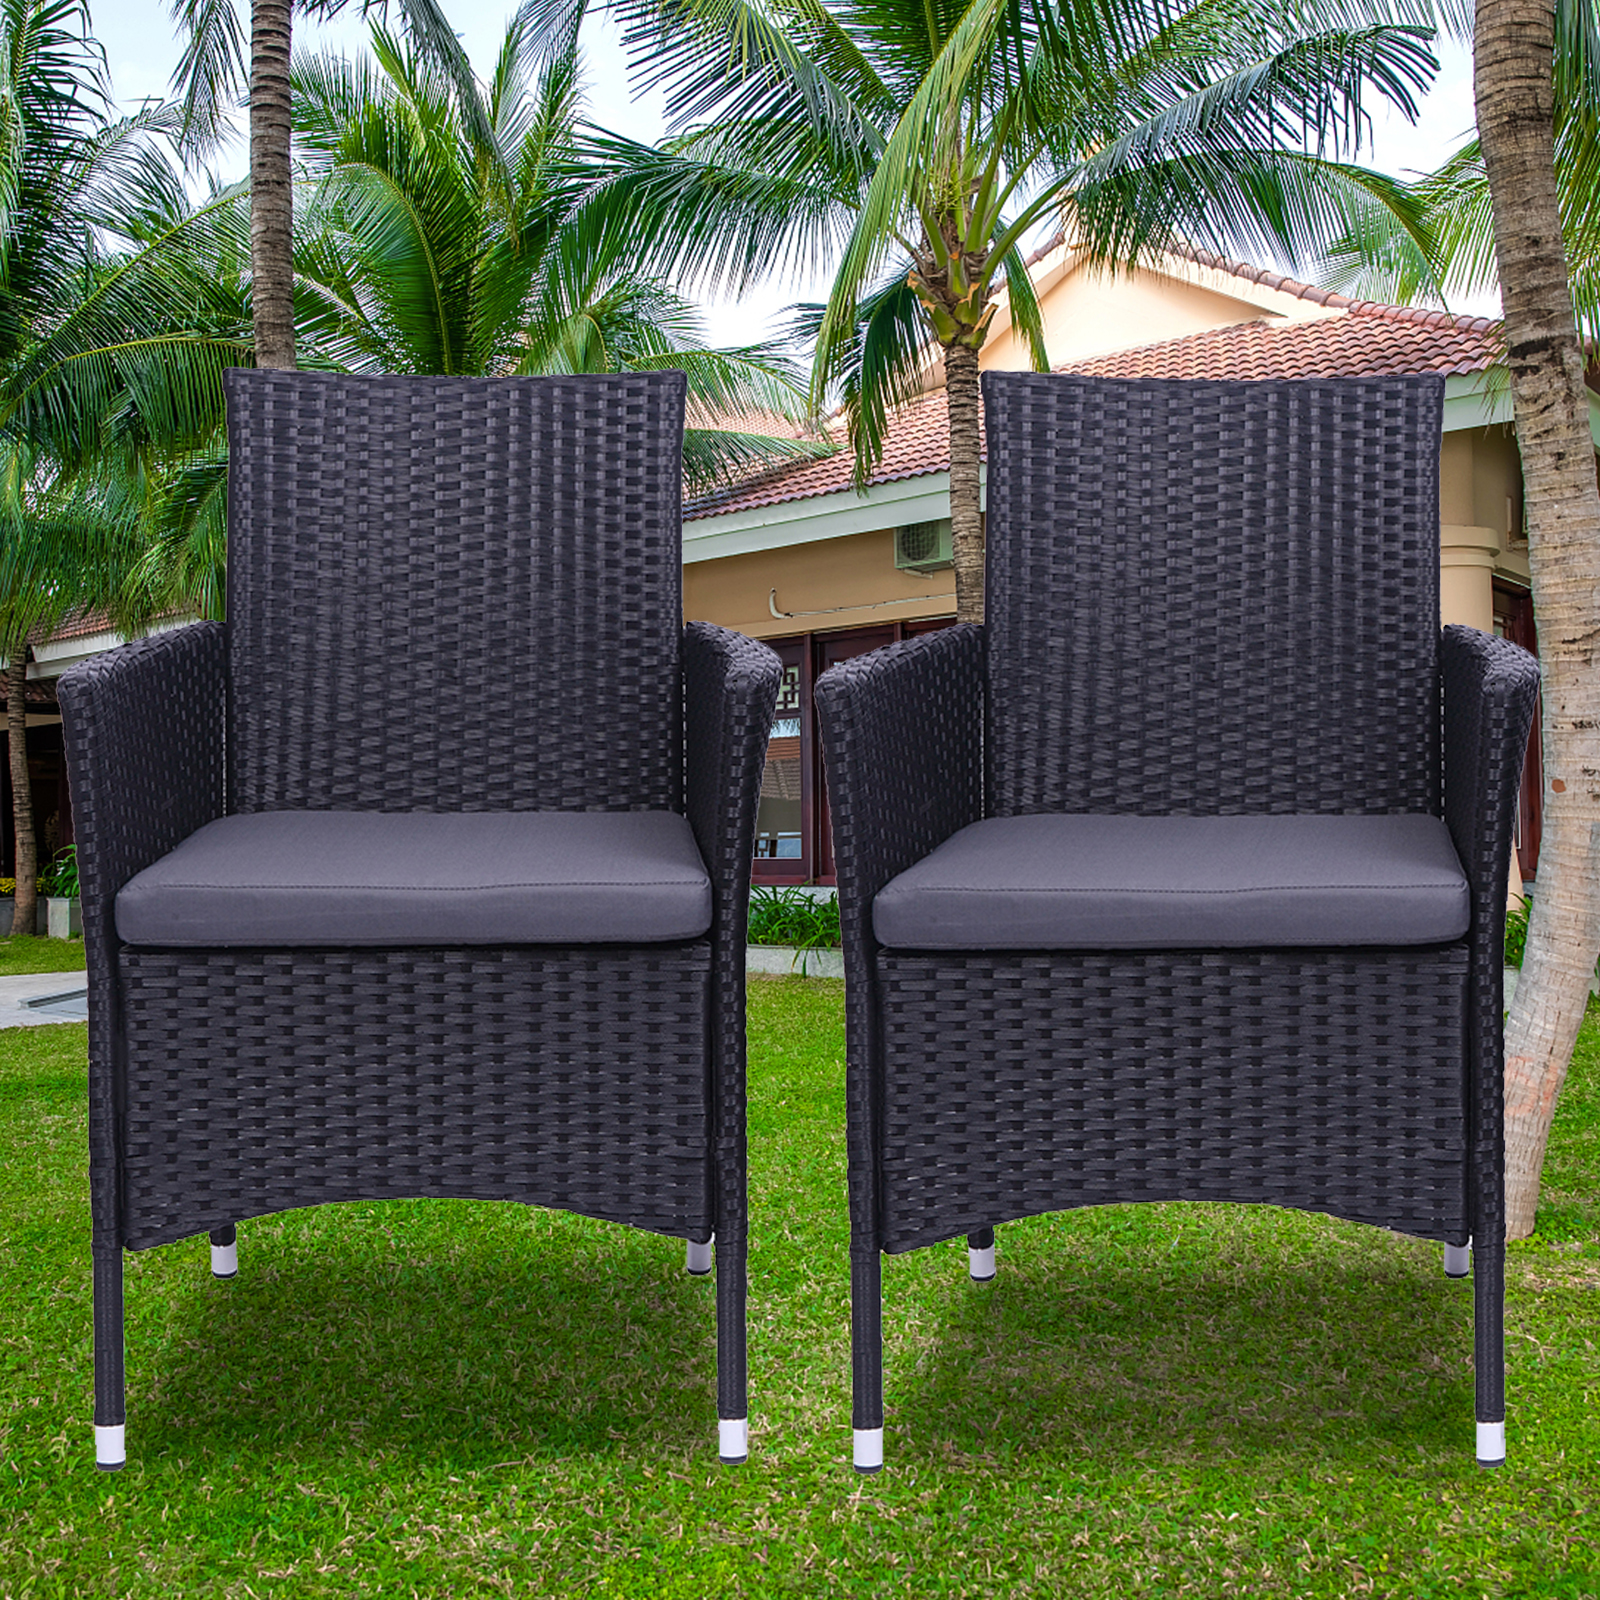 Patio Chairs Set of 2, BTMWAY All-Weather Wicker Patio Furniture Set, Heavy Duty Rattan Bistro Chairs Conversation Set, Front Porch Furniture Outdoor Chairs Set for Backyard Garden Balcony, Black - image 3 of 11